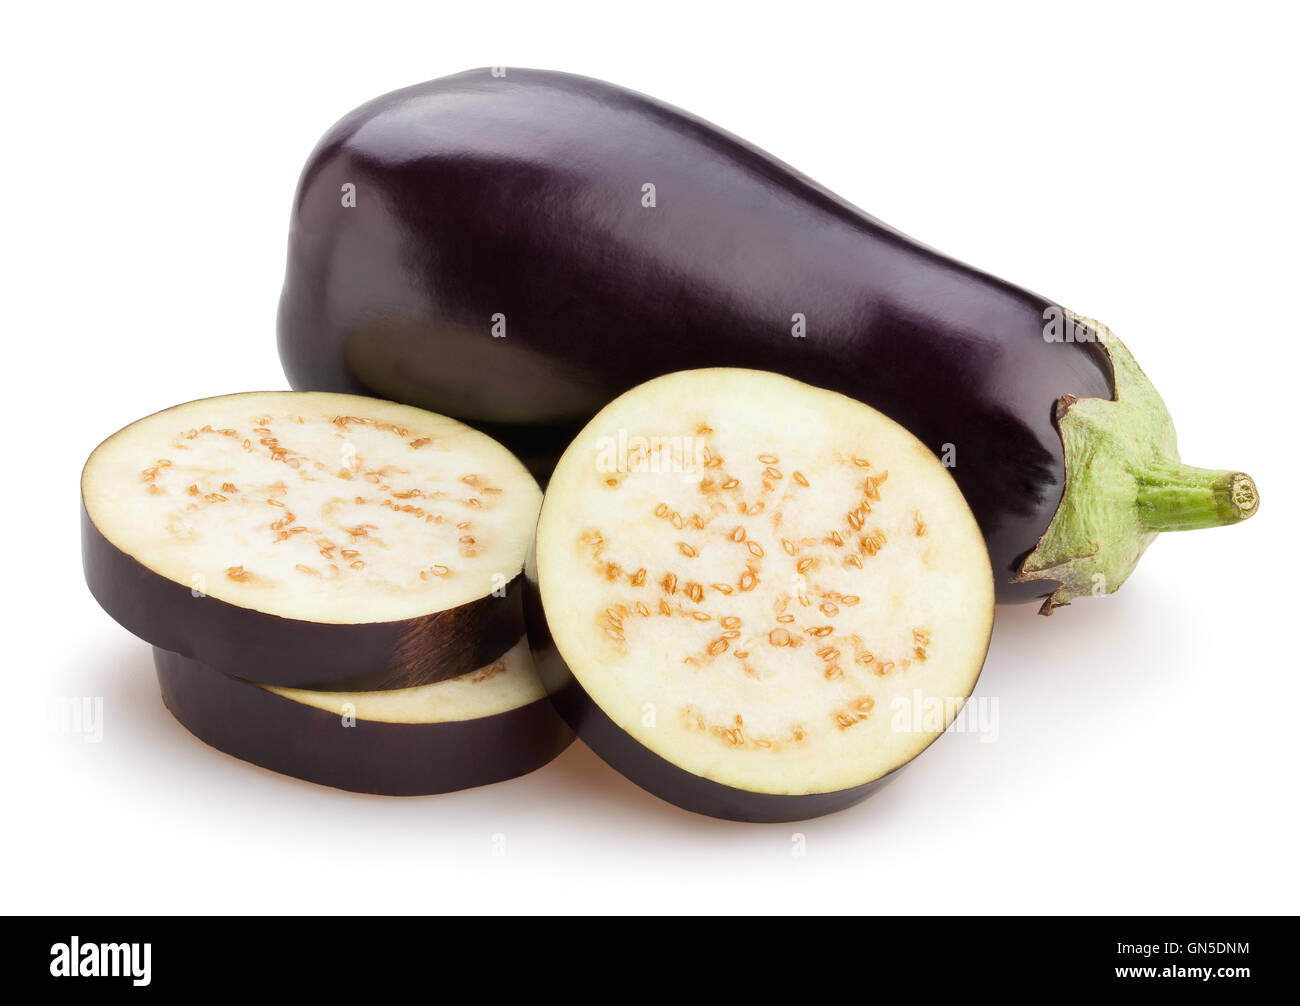 Cutting eggplant slices into bread … – License image – 10173092